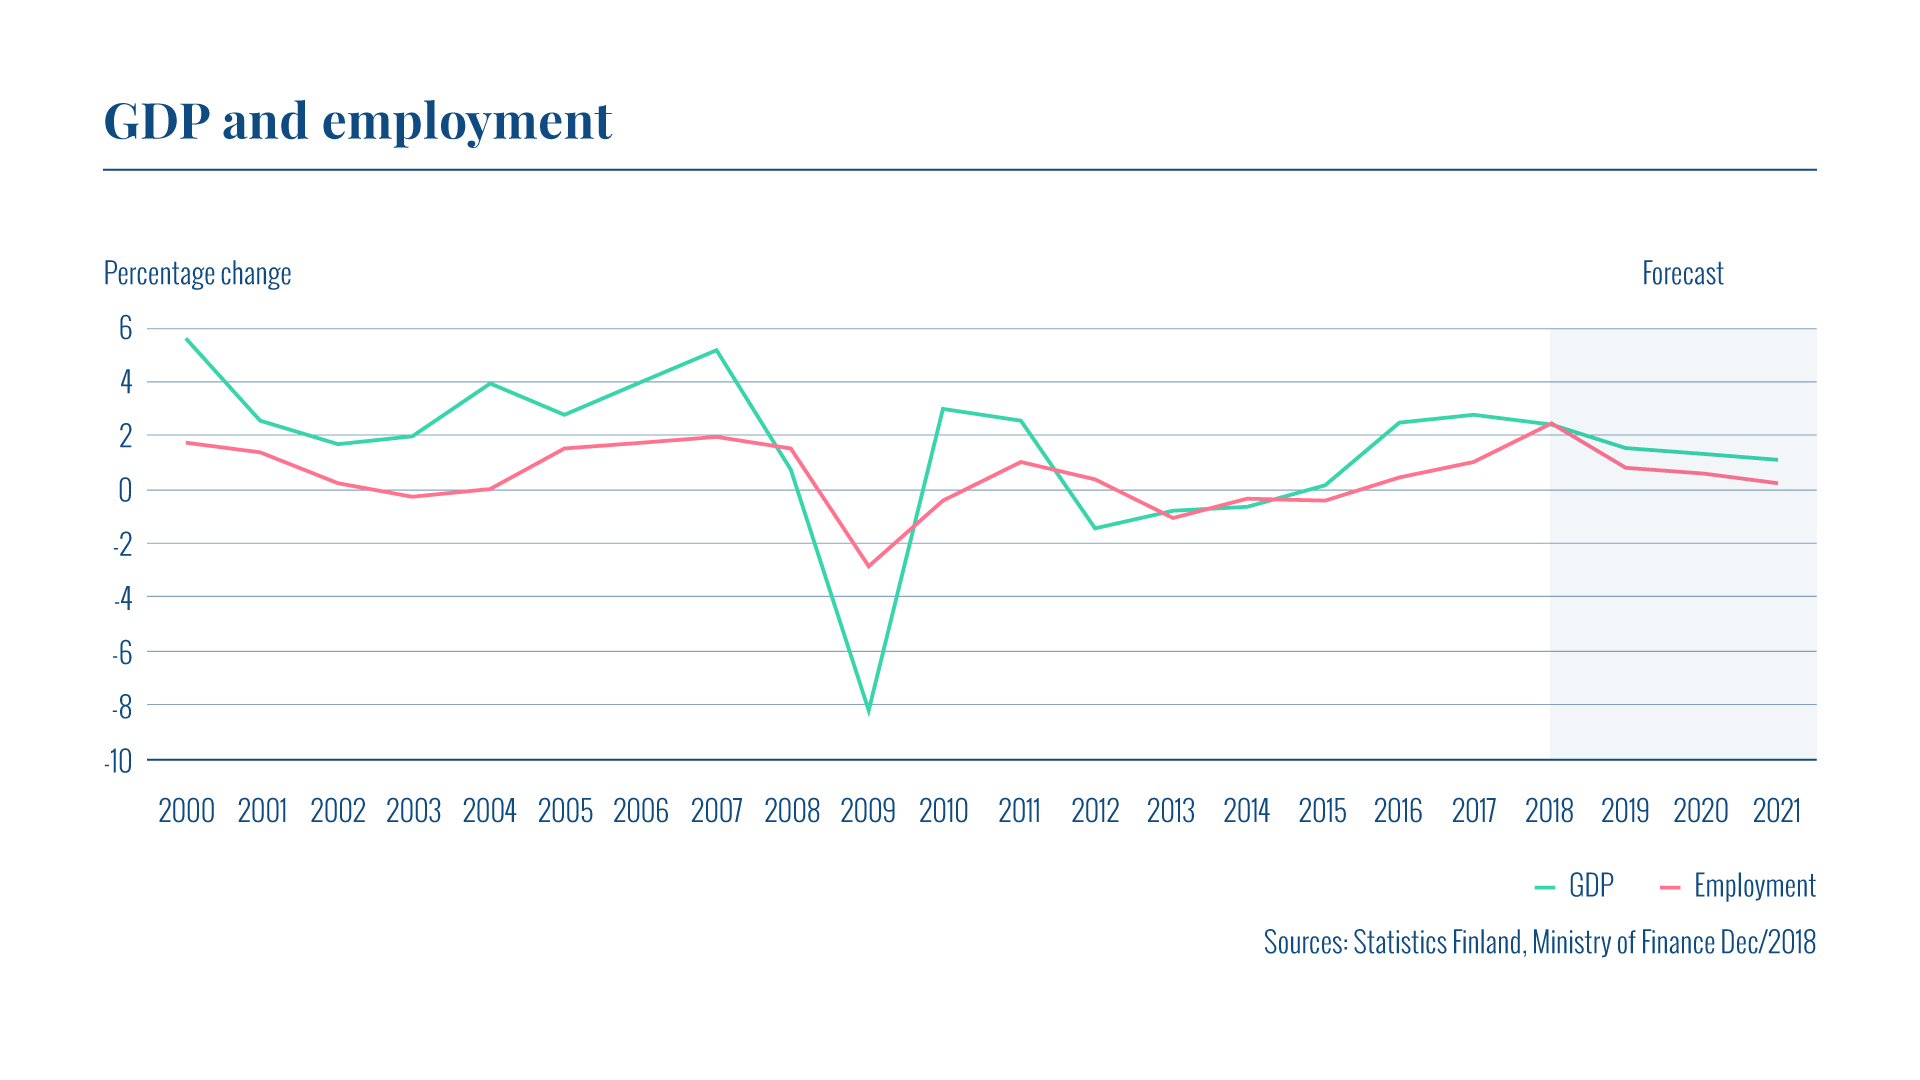 The graph shows information on the annual change in GDP and employment in Finland. GDP growth and the employment rate have increased in recent years.